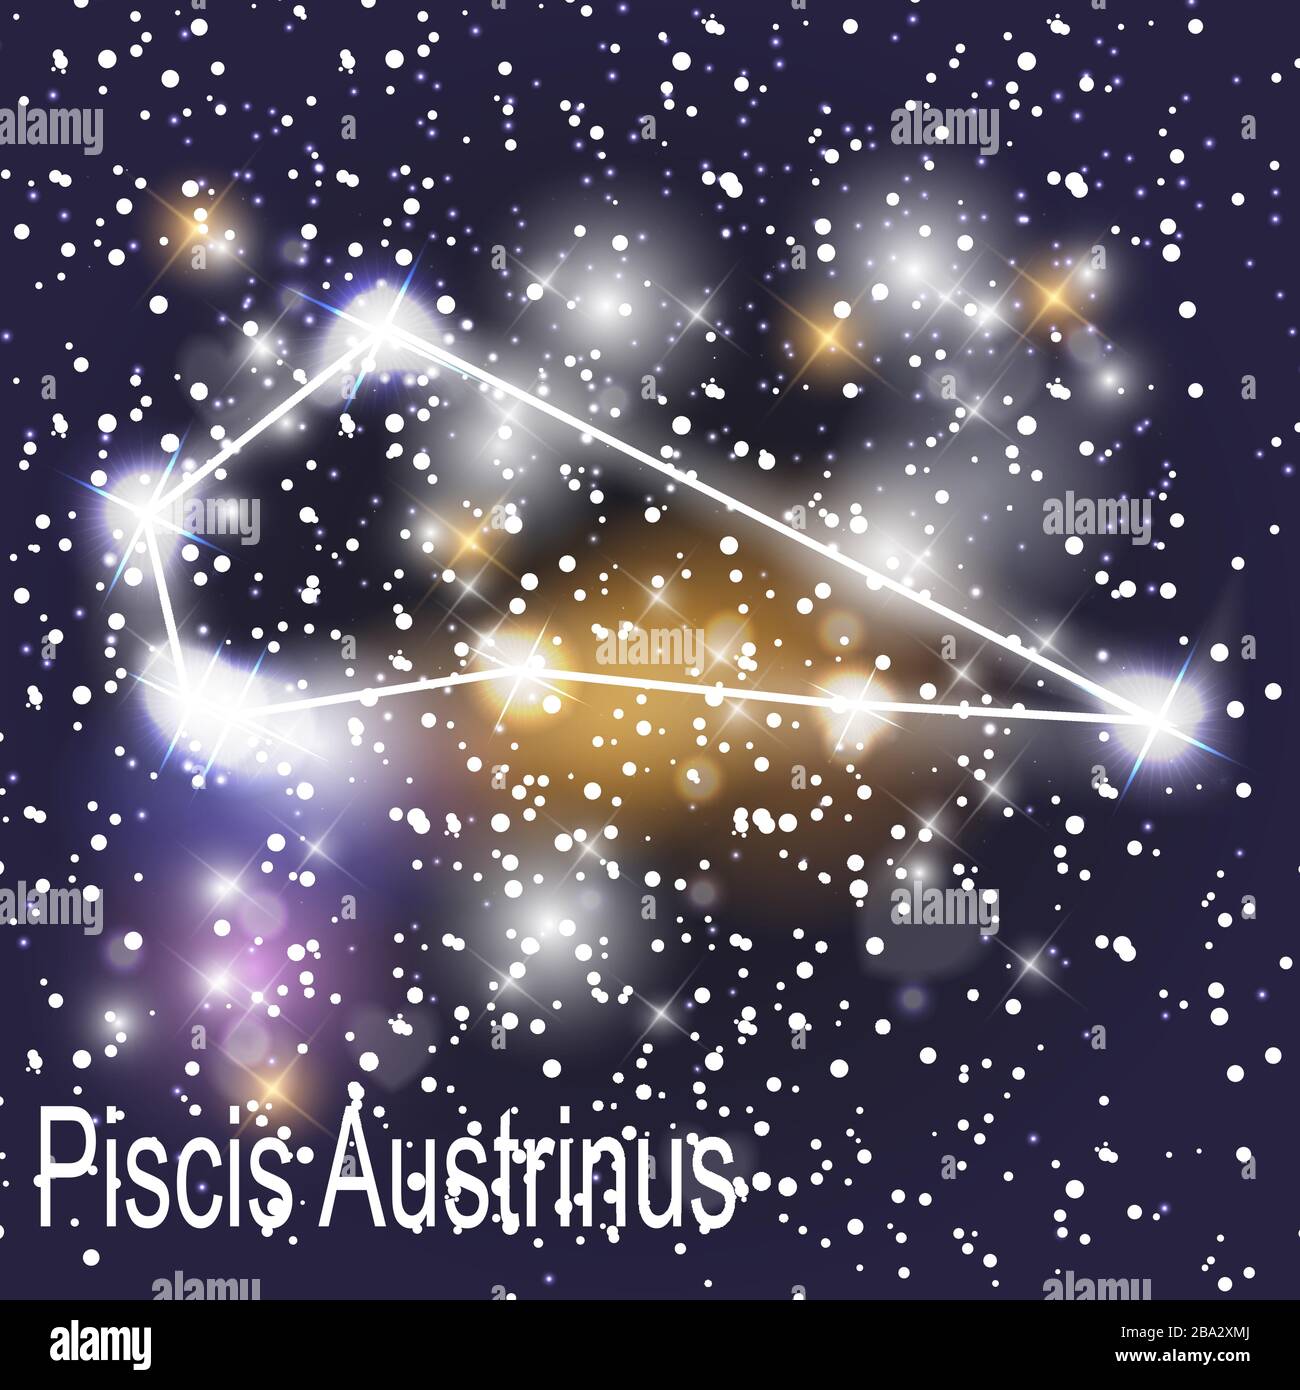 Piscis Austrinus Constellation with Beautiful Bright Stars on the Background of Cosmic Sky Vector Illustration. EPS10 Stock Vector